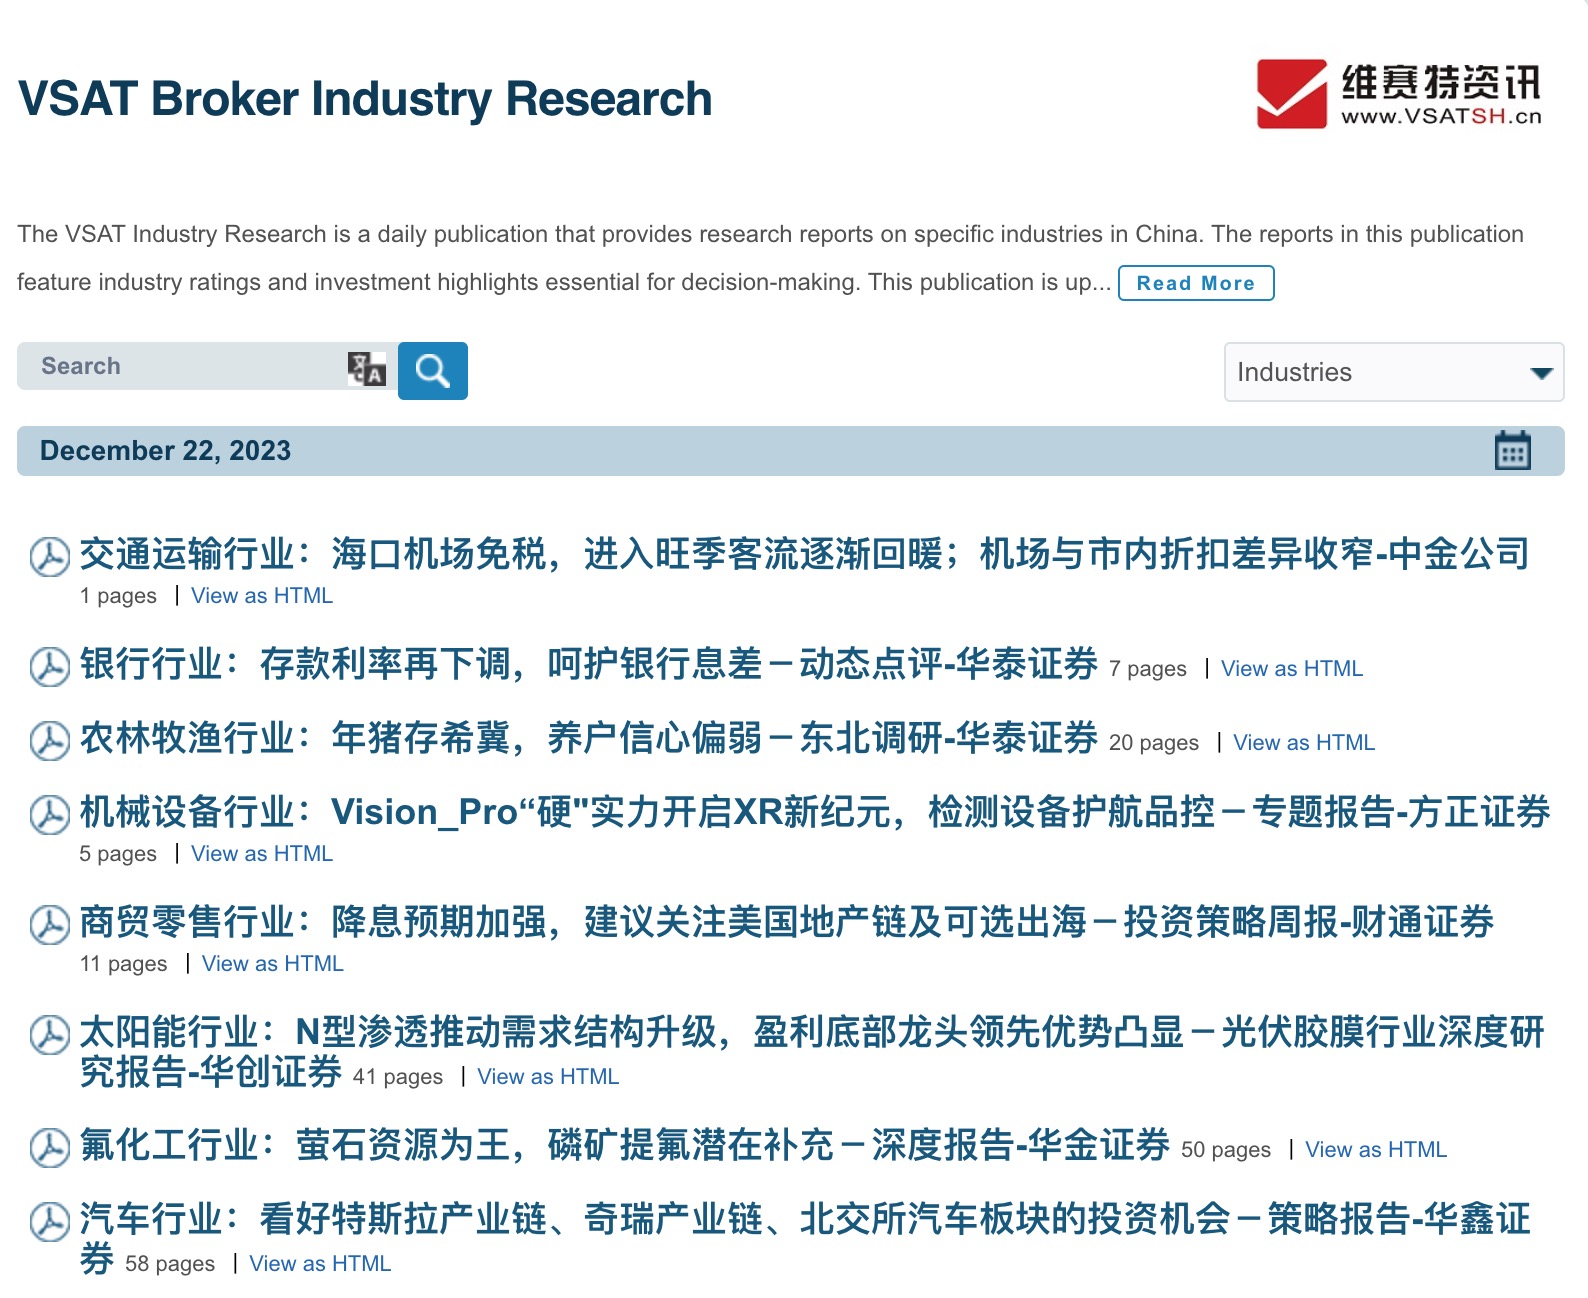 VSAT Broker Industry Research Reports